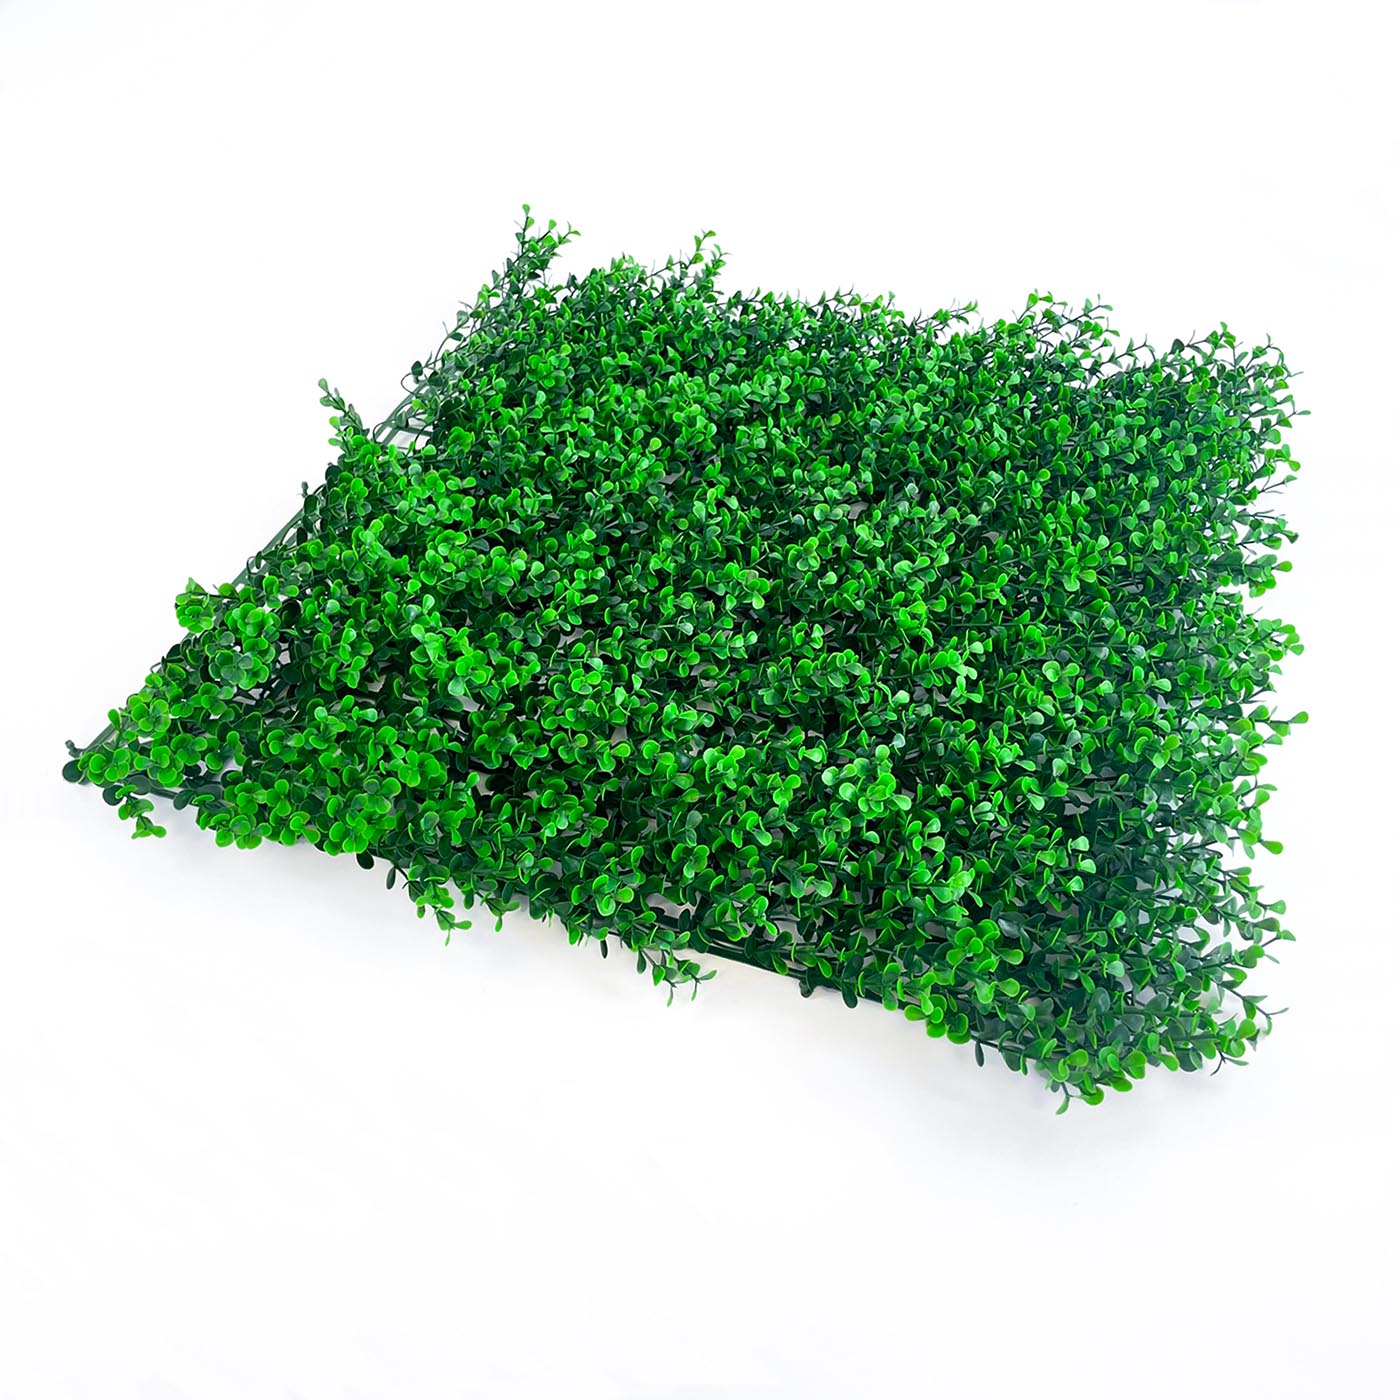 Boxwood dark artificial hedging tile with long garden green, thick foliage